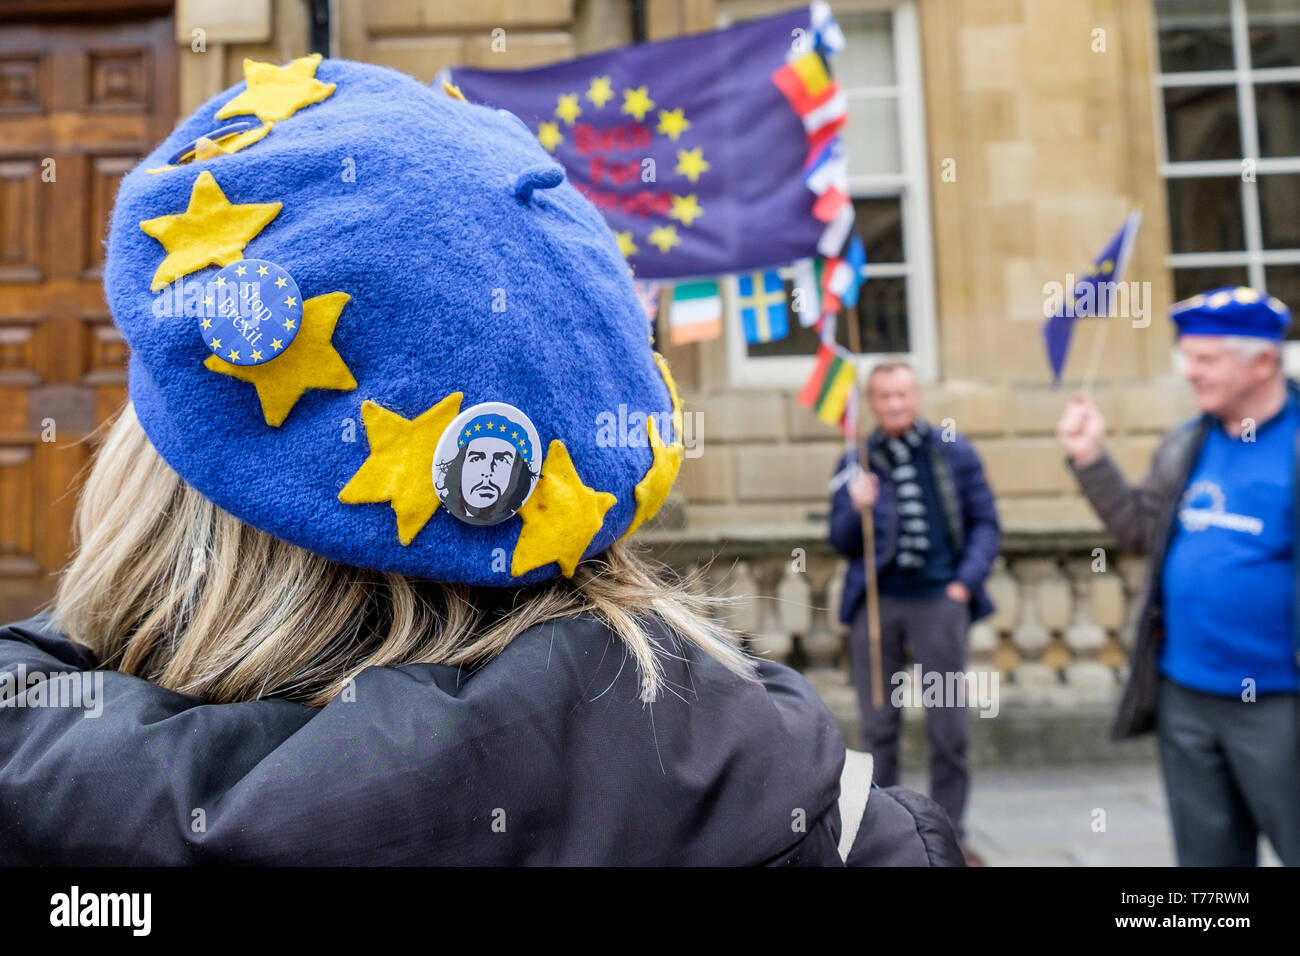 Bath, Somerset, UK, 5th May, 2019. A member from the Bath for Europe group is pictured wearing a bEUret / Bath Beret which has become one of the main symbols of the campaign to Remain in the EU as they take part in a walk through the streets of Bath. Bath for Europe are a non-party-political group of volunteers campaigning for the UK to remain at the heart of the European Union, they are also campaigning for a People’s Vote on the final Brexit deal. Credit: Lynchpics/Alamy Live News Stock Photo